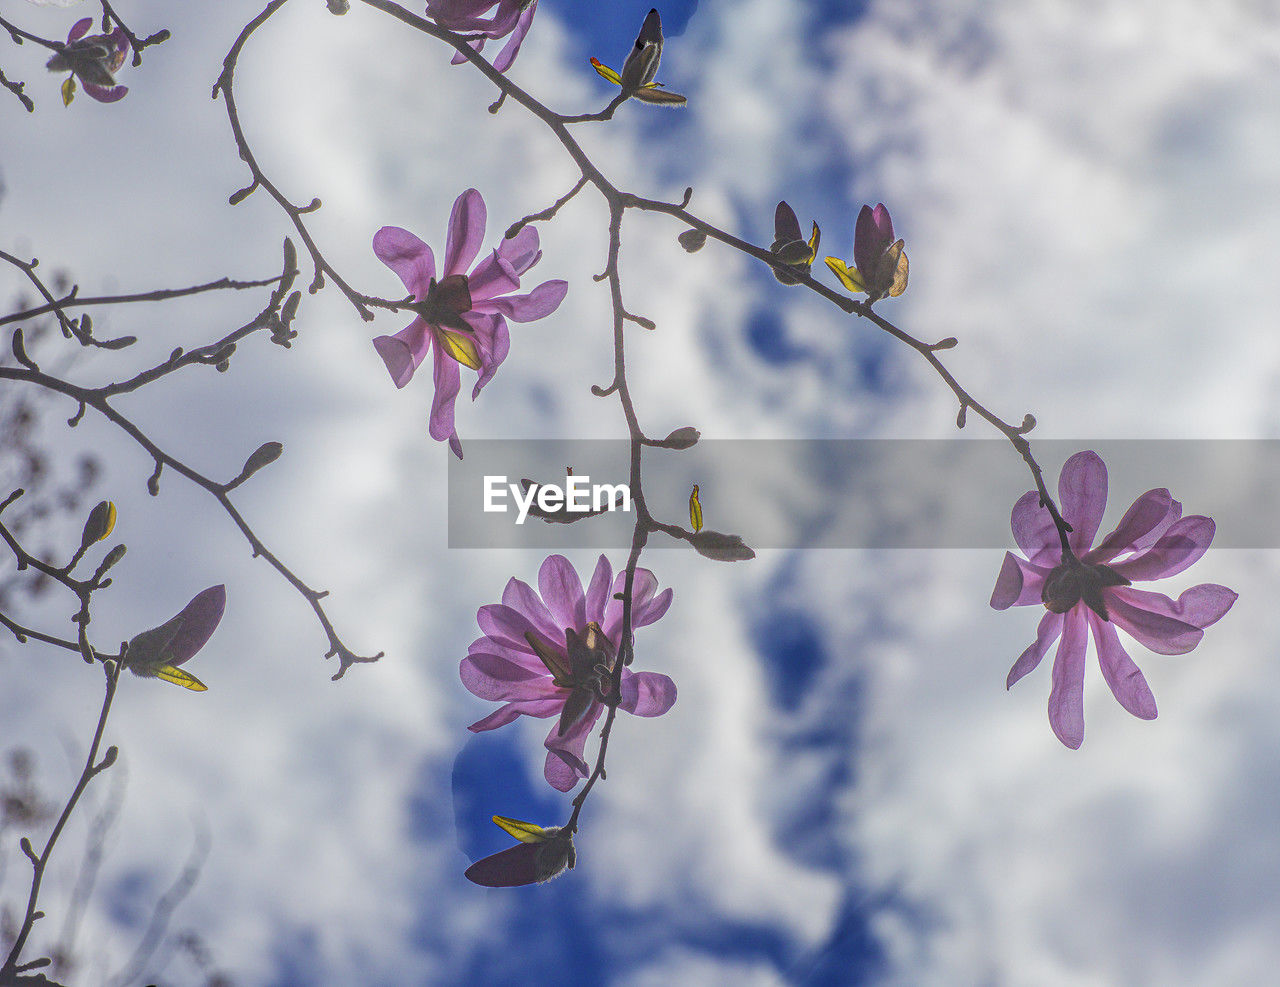 plant, flower, flowering plant, beauty in nature, blossom, nature, freshness, sky, tree, pink, fragility, cloud, branch, springtime, purple, growth, no people, spring, outdoors, close-up, petal, focus on foreground, cherry blossom, flower head, low angle view, day, inflorescence, blue, multi colored